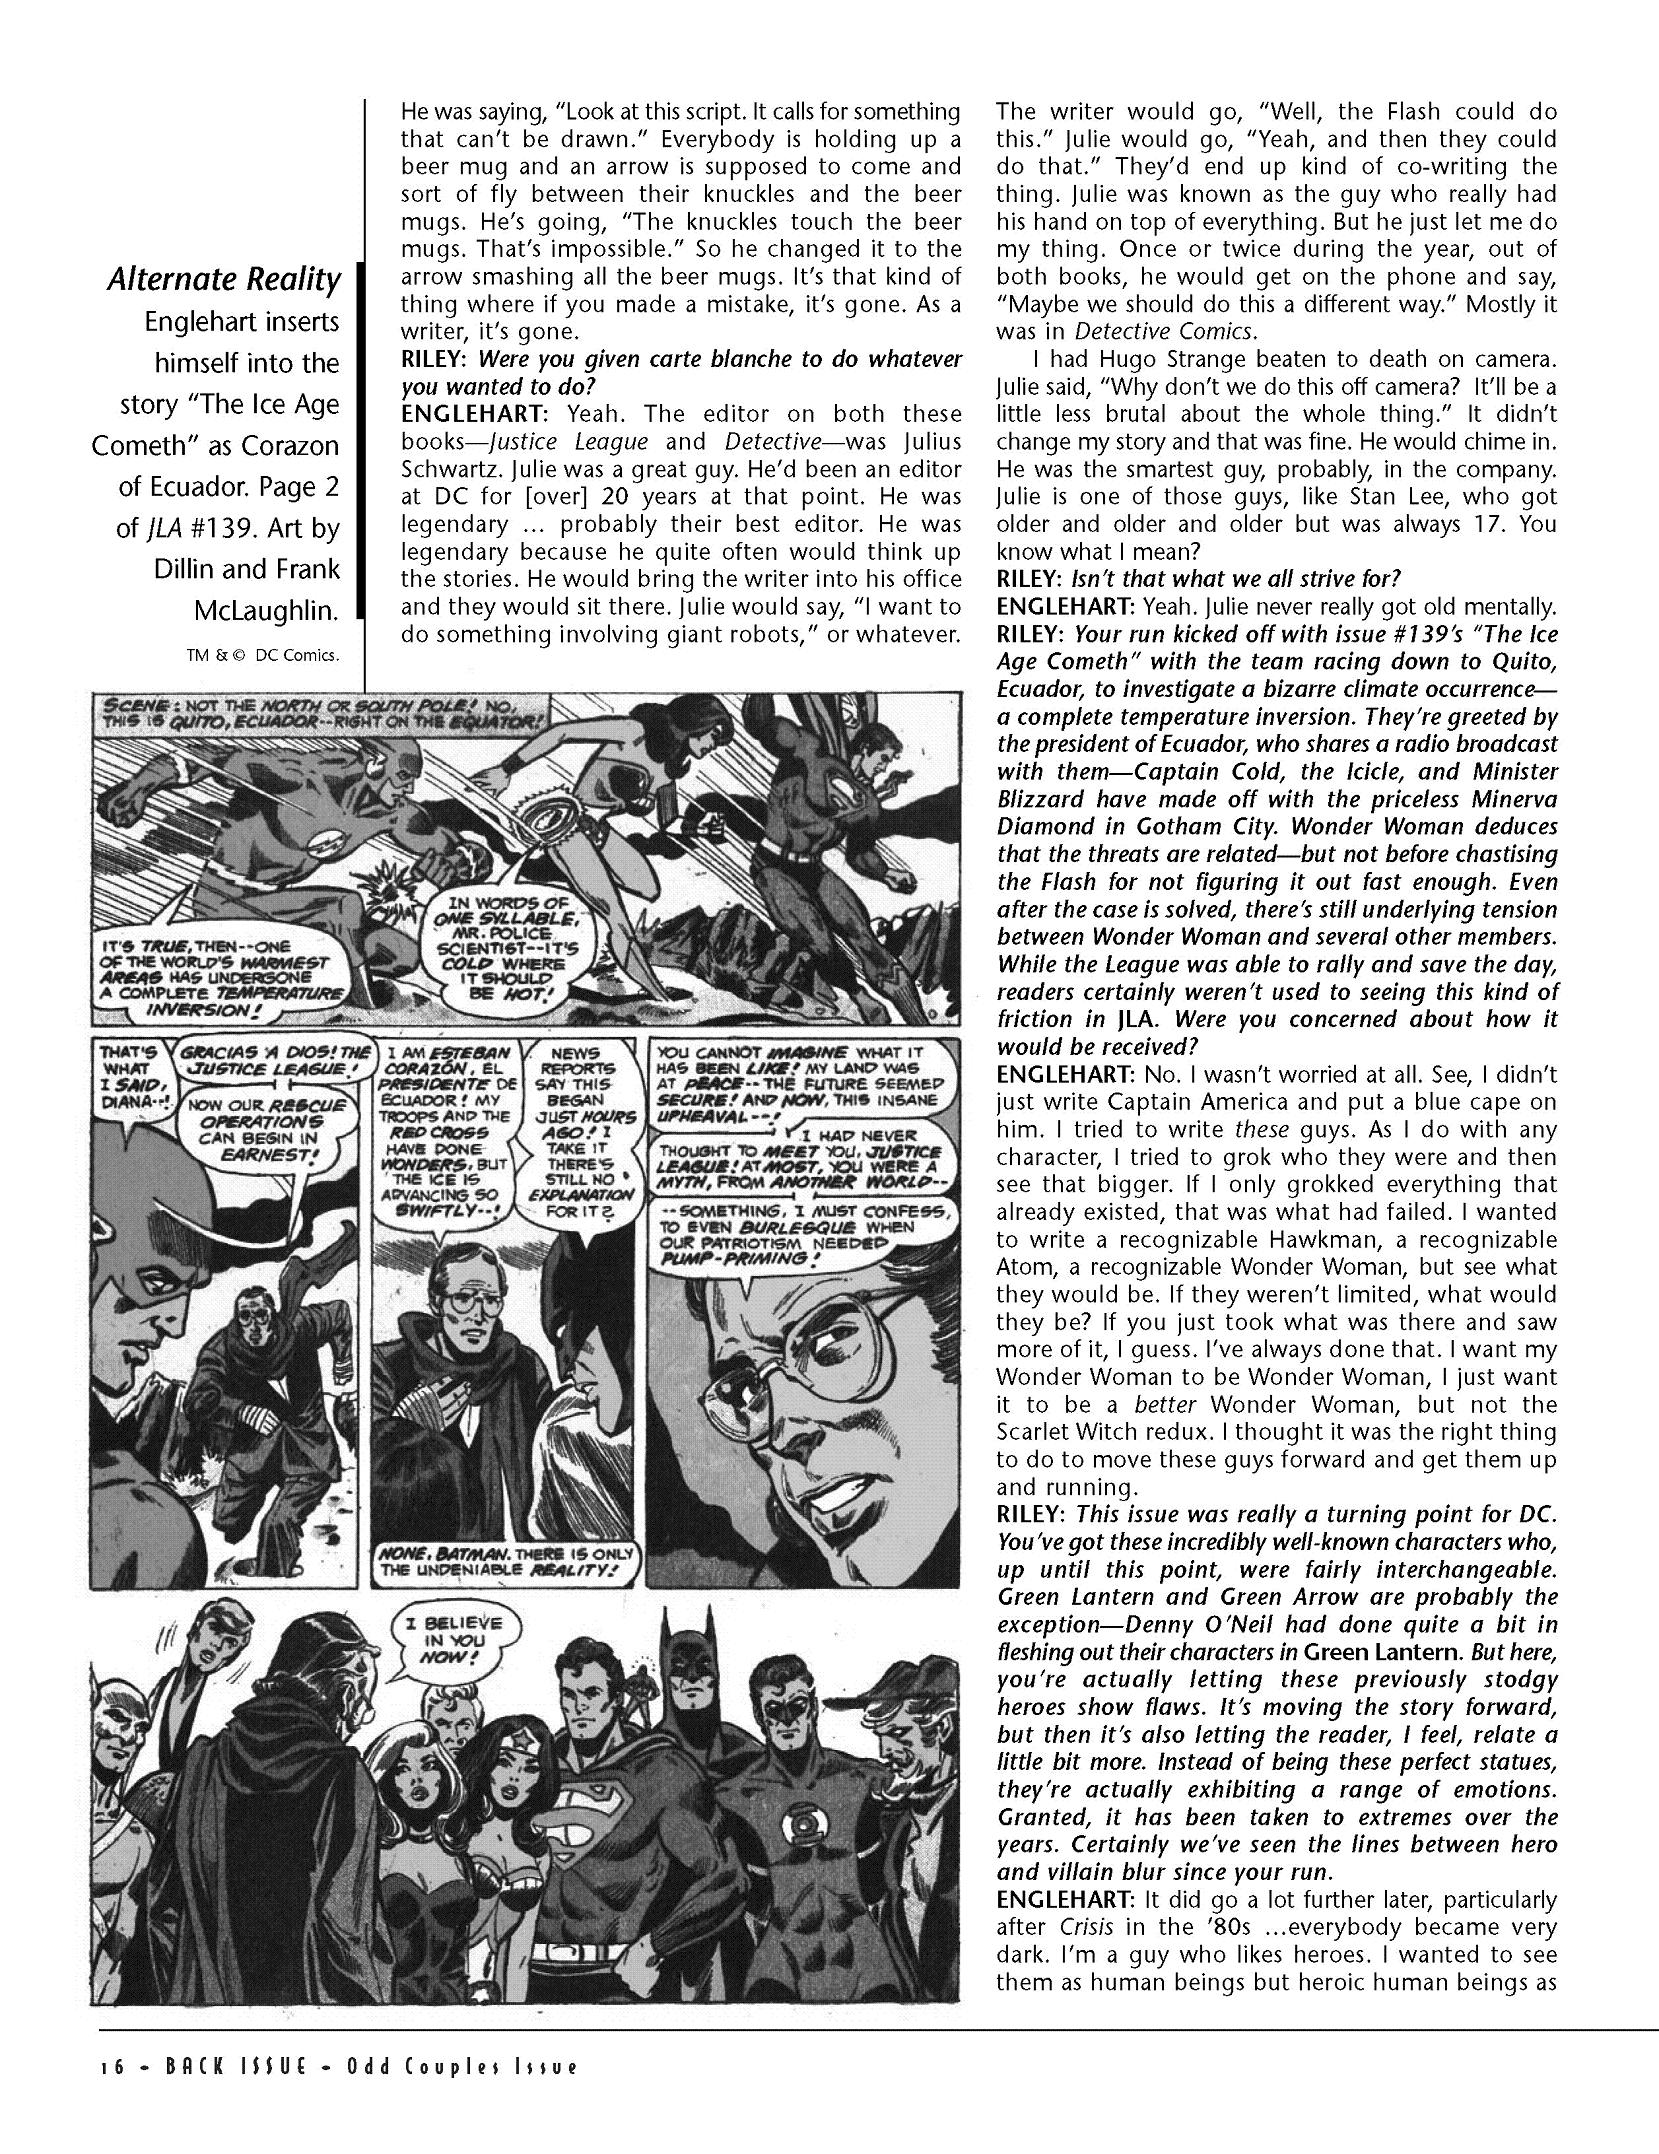 Read online Back Issue comic -  Issue #45 - 18